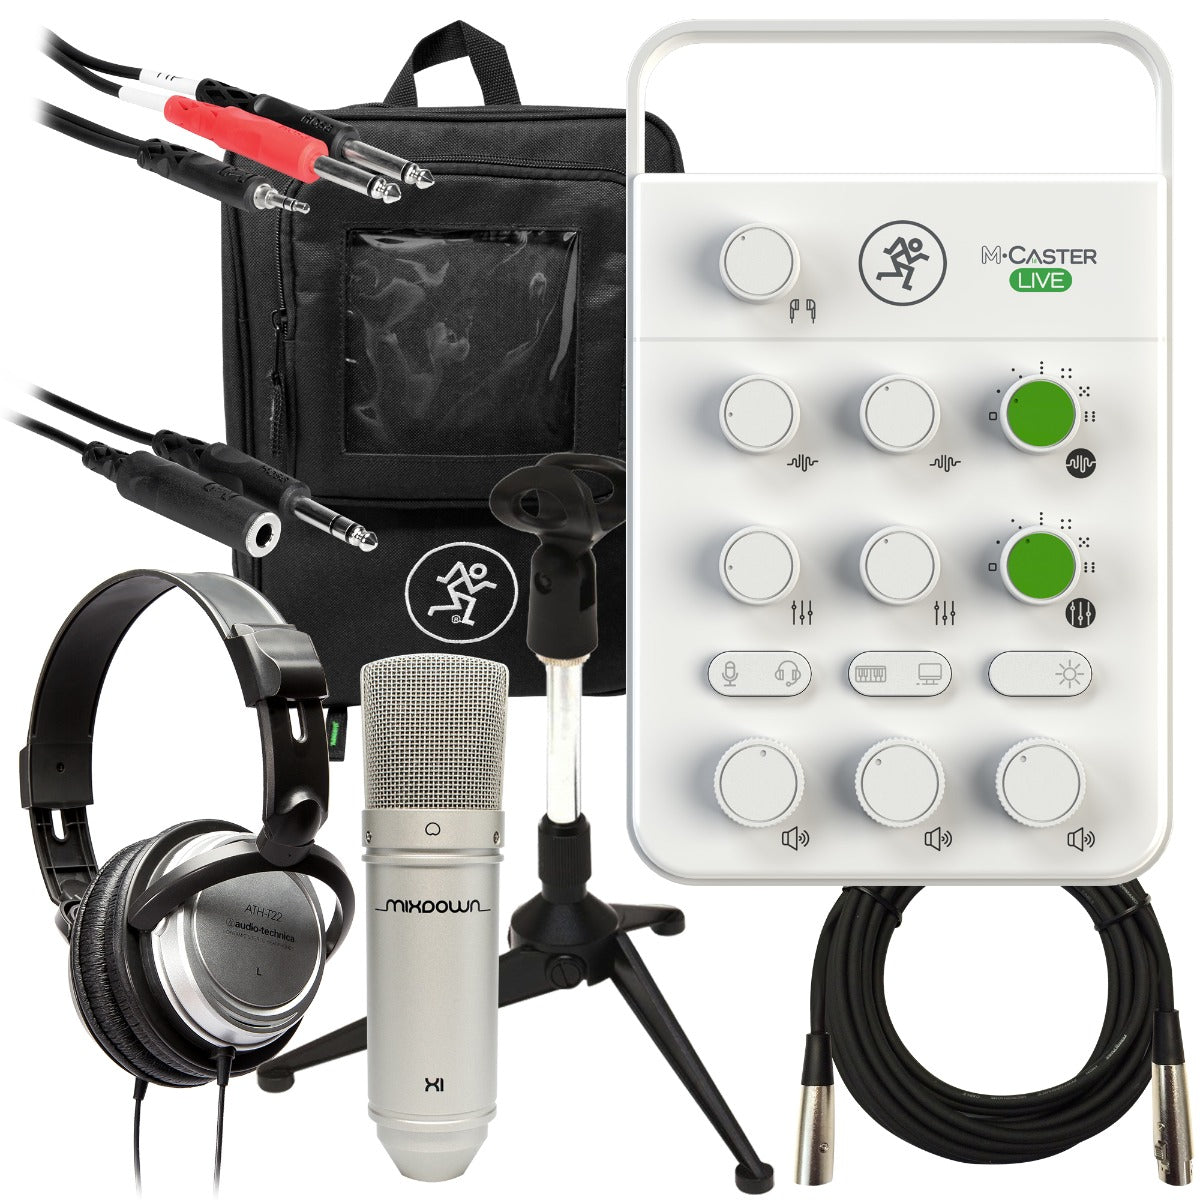 Collage of the components in the Mackie M-Caster Live Portable Live Streaming Mixer - White COMPLETE AUDIO BUNDLE